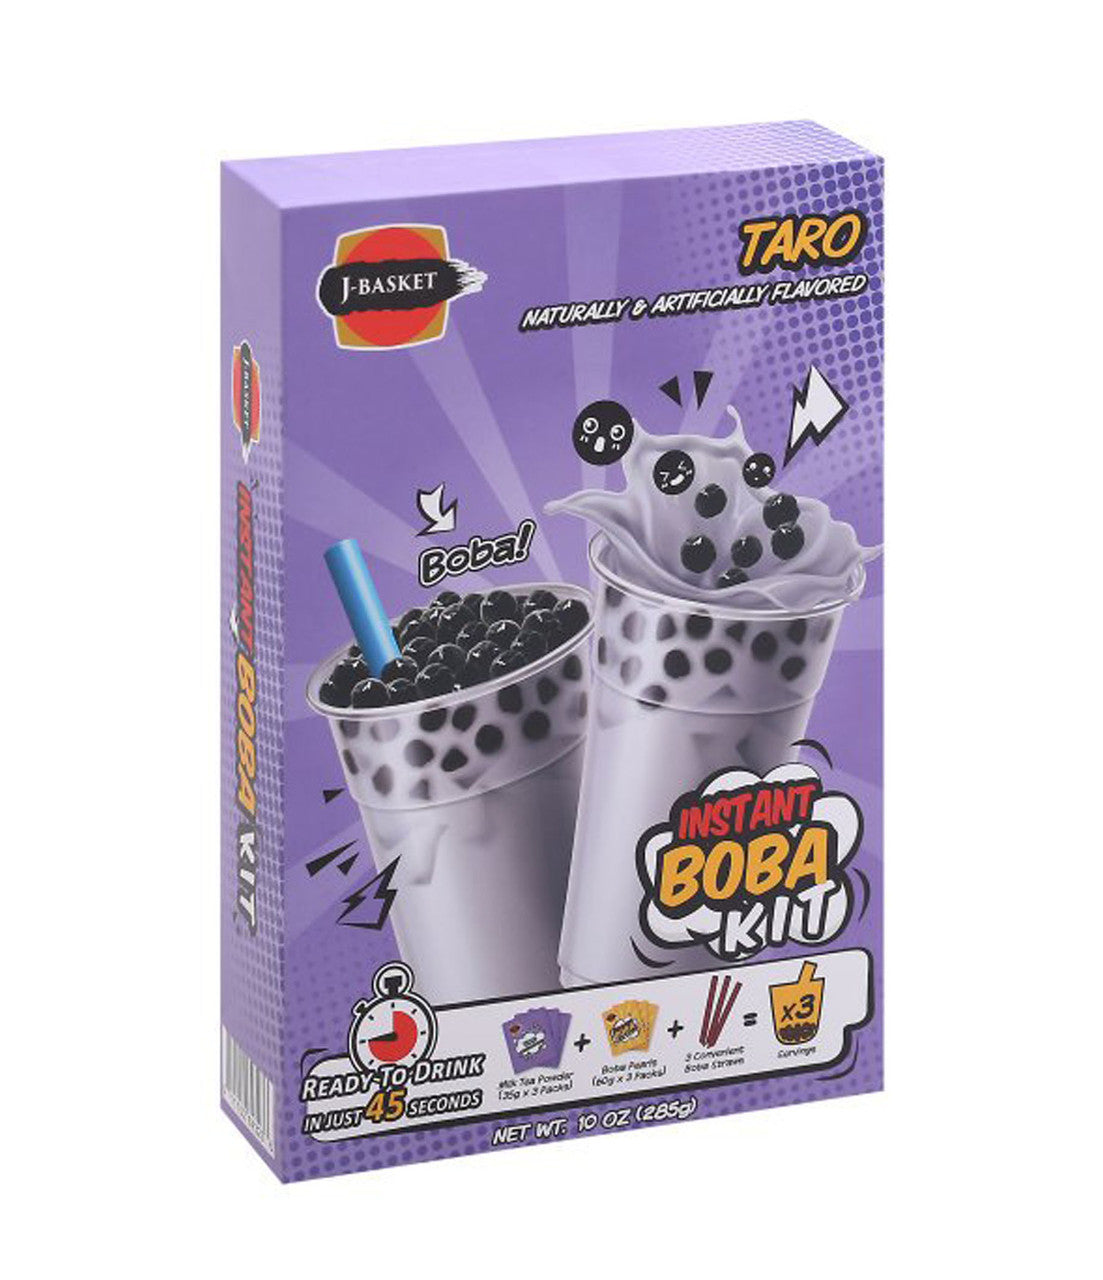 J-Basket Instant Boba Kit, Taro Flavor, 285g/10 oz. Box {Imported from Canada}